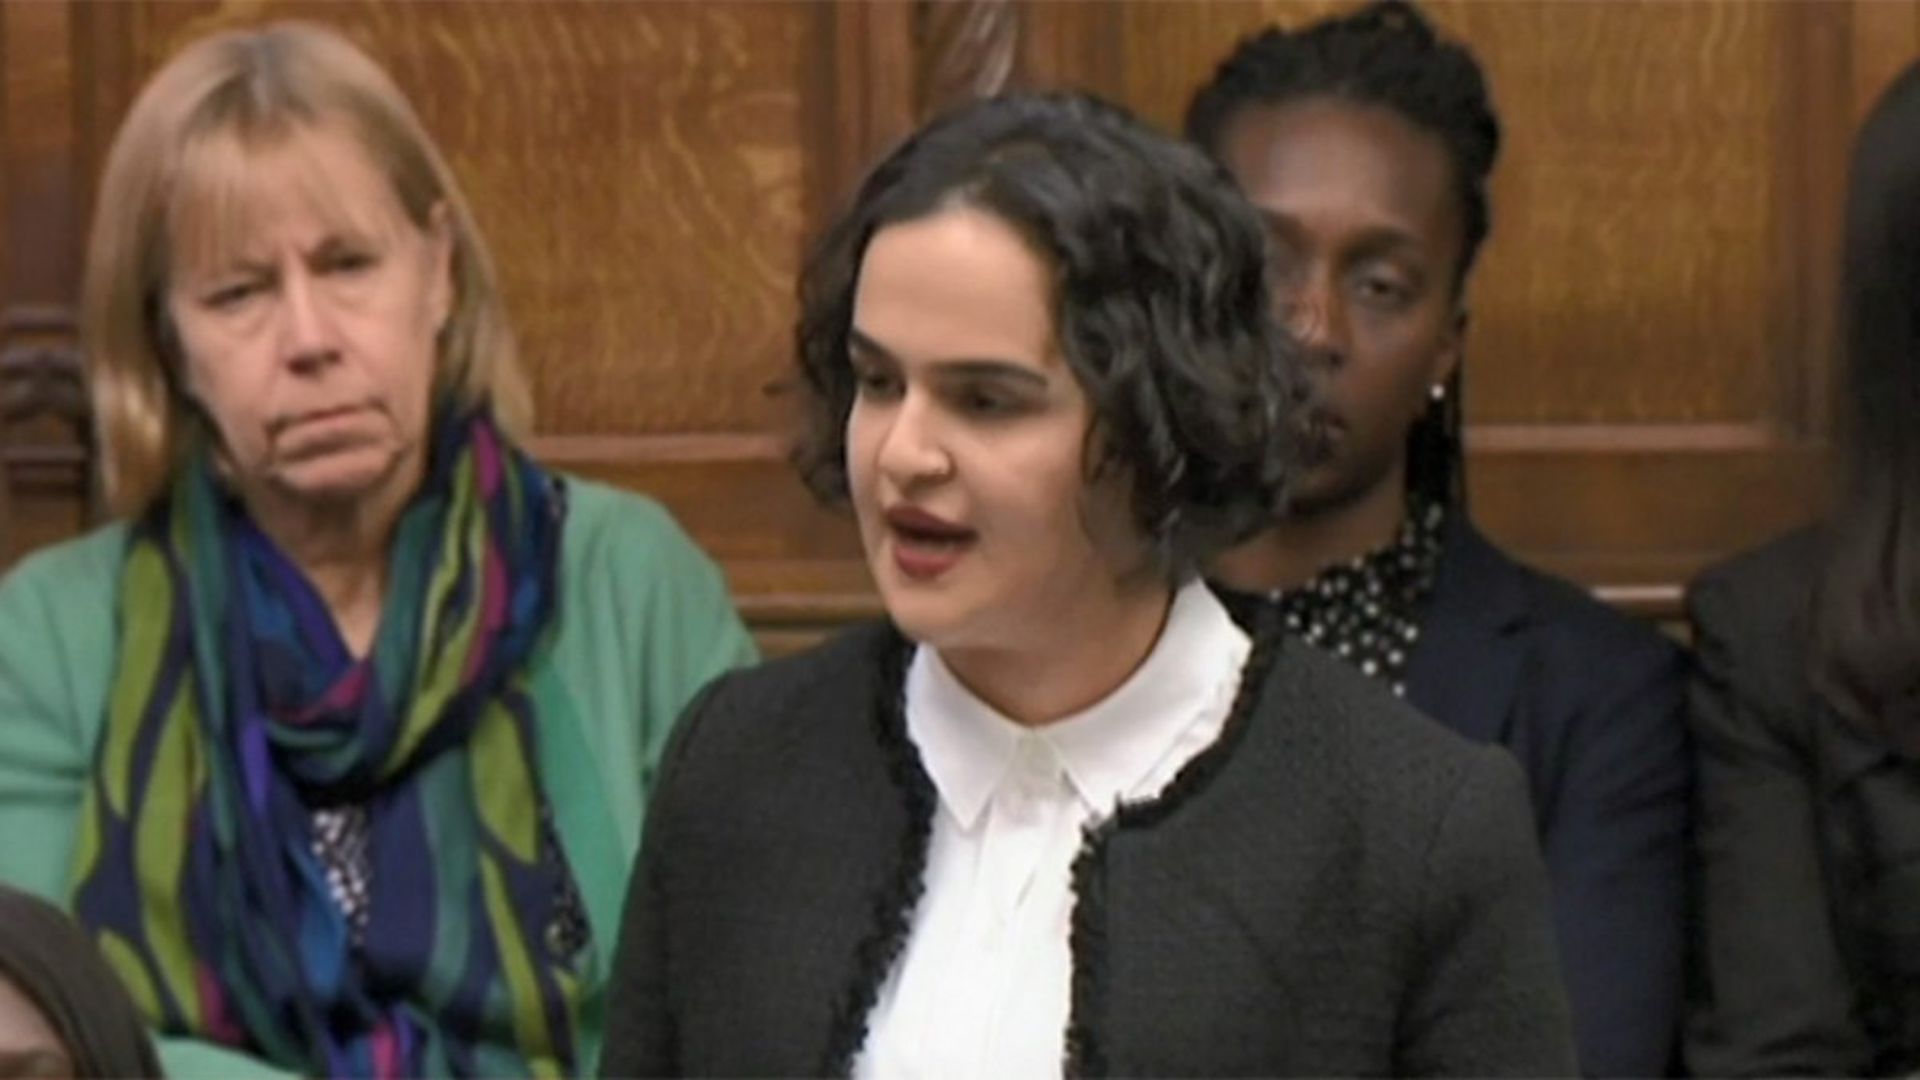 Nadia Whittome in the House of Commons - Credit: Parliament Live